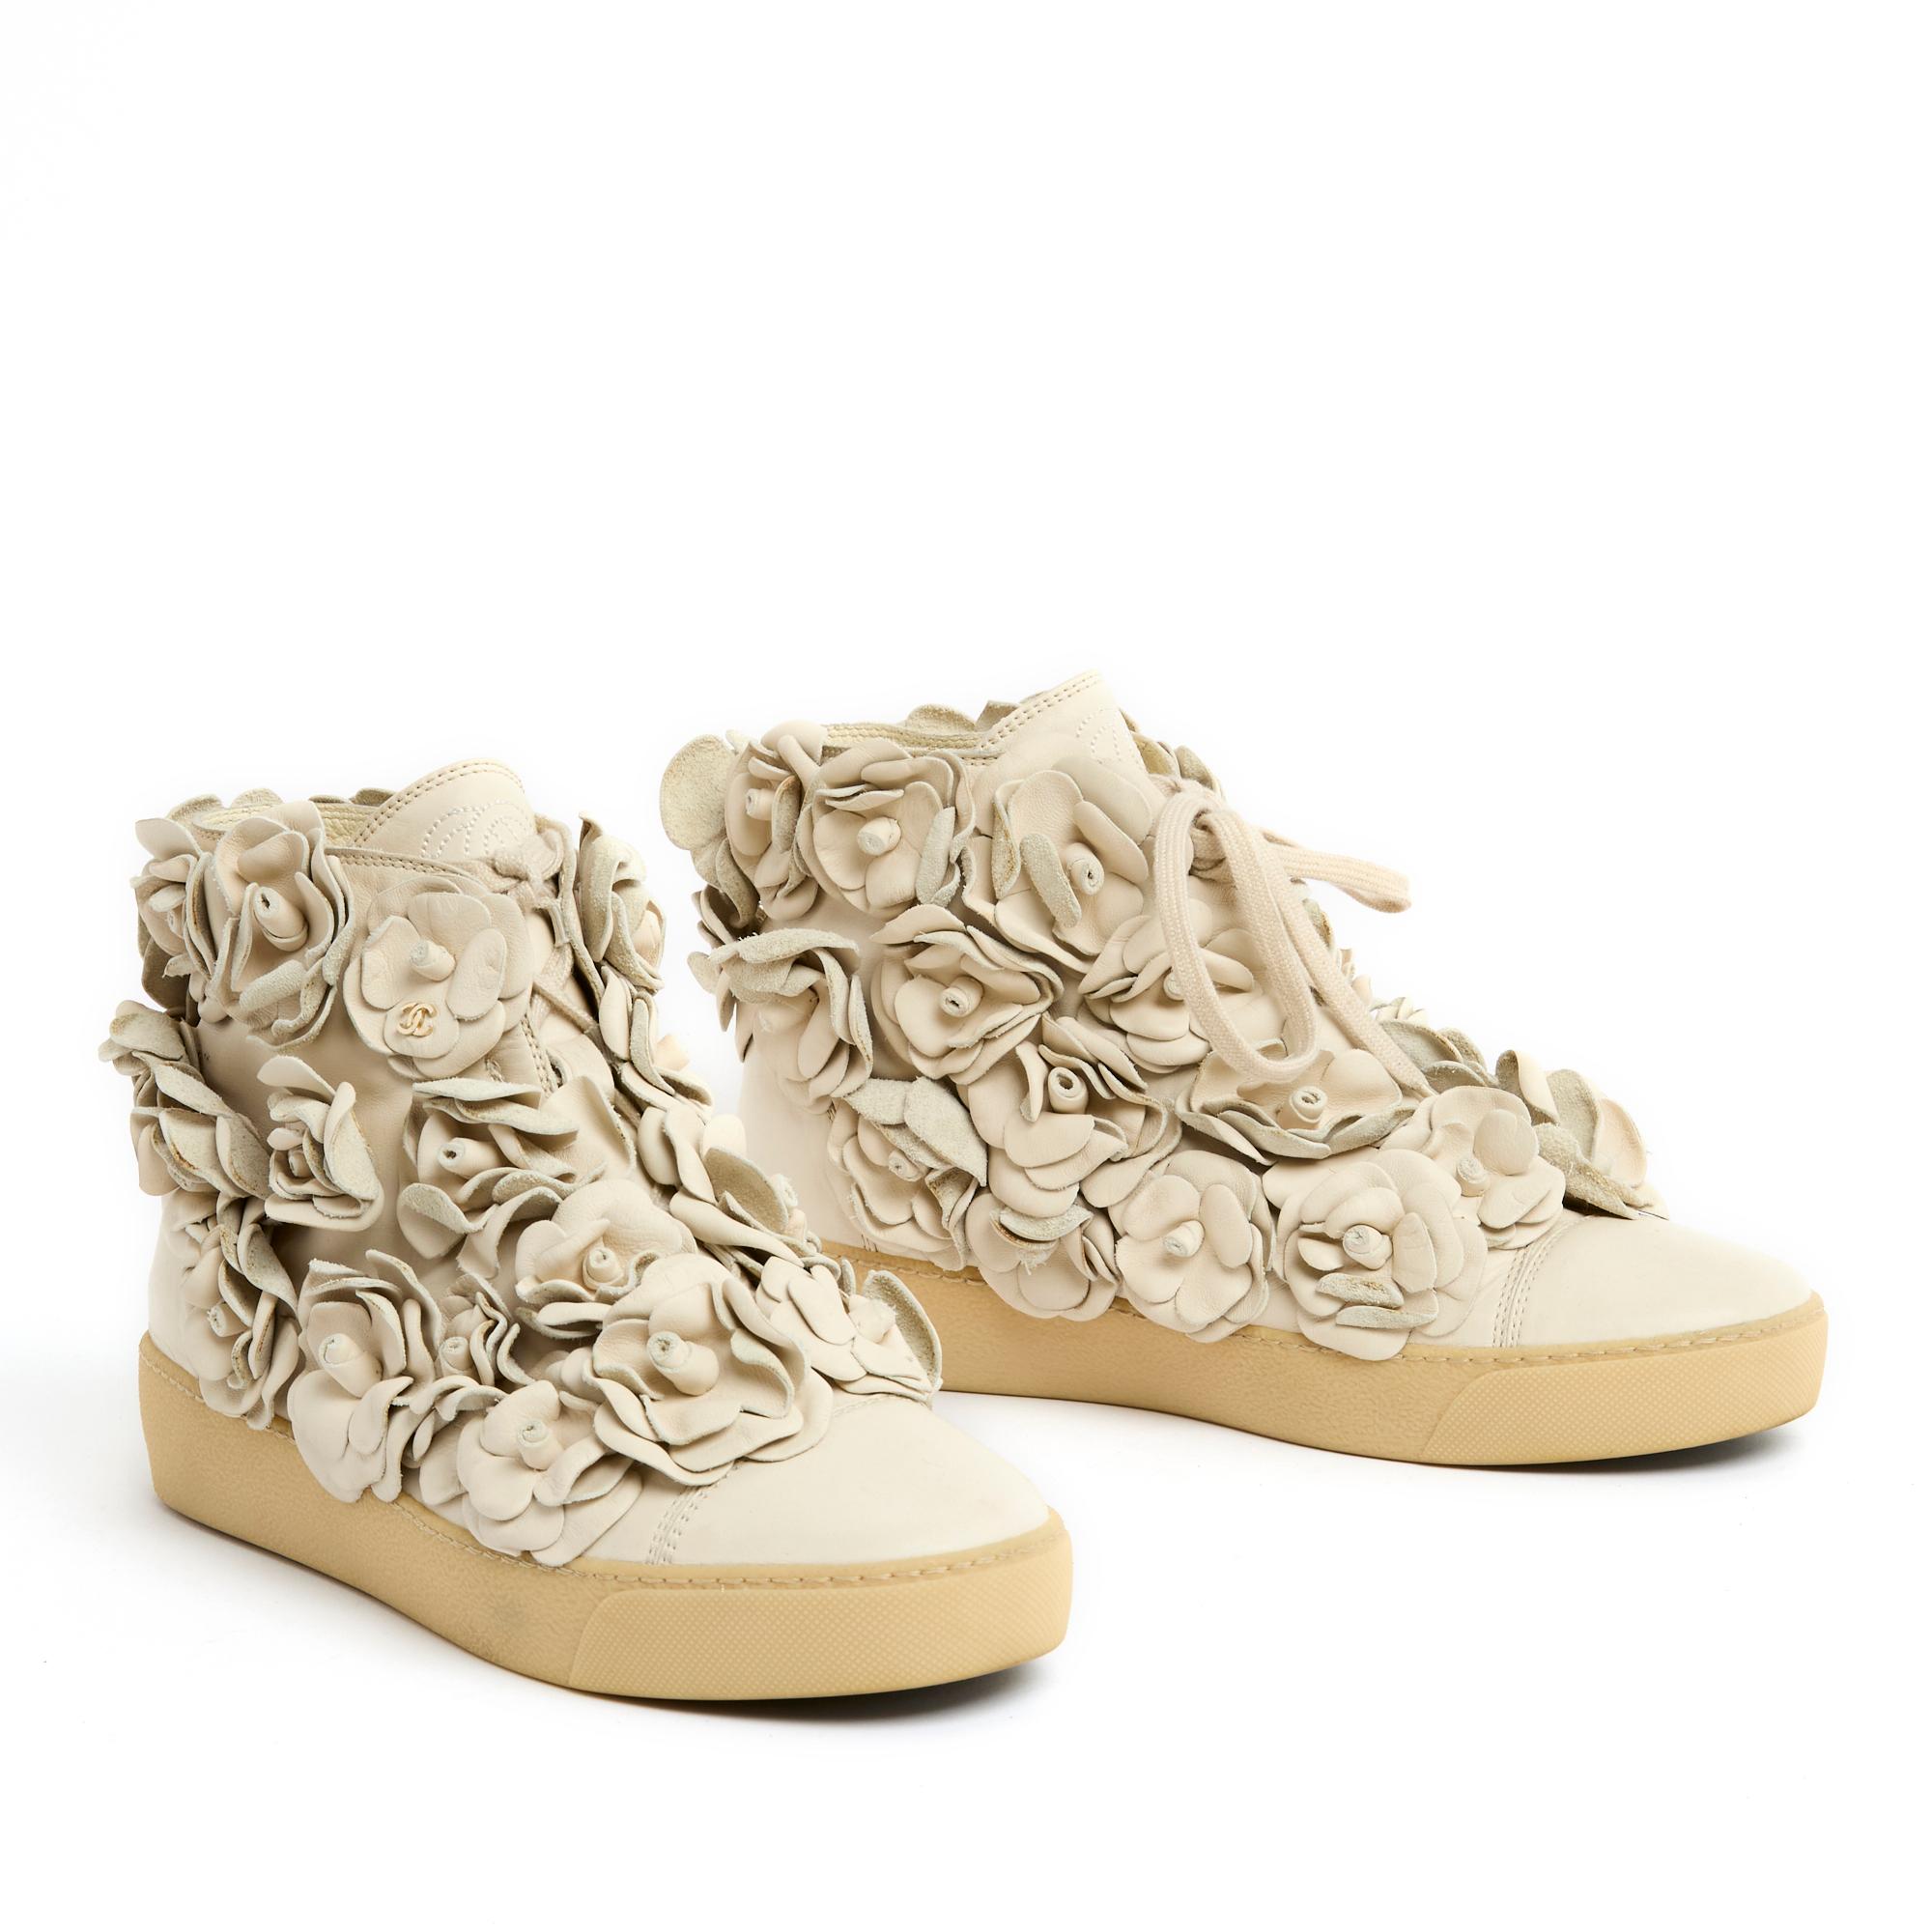 Chanel shoes high-top sneakers in beige leather entirely covered with flowers of the same leather, almond toe in matching leather, beige and black rubber sole on the front, closure with a long lace on 5 hidden loops. Size 39FR either UK5.5 or US7.5,